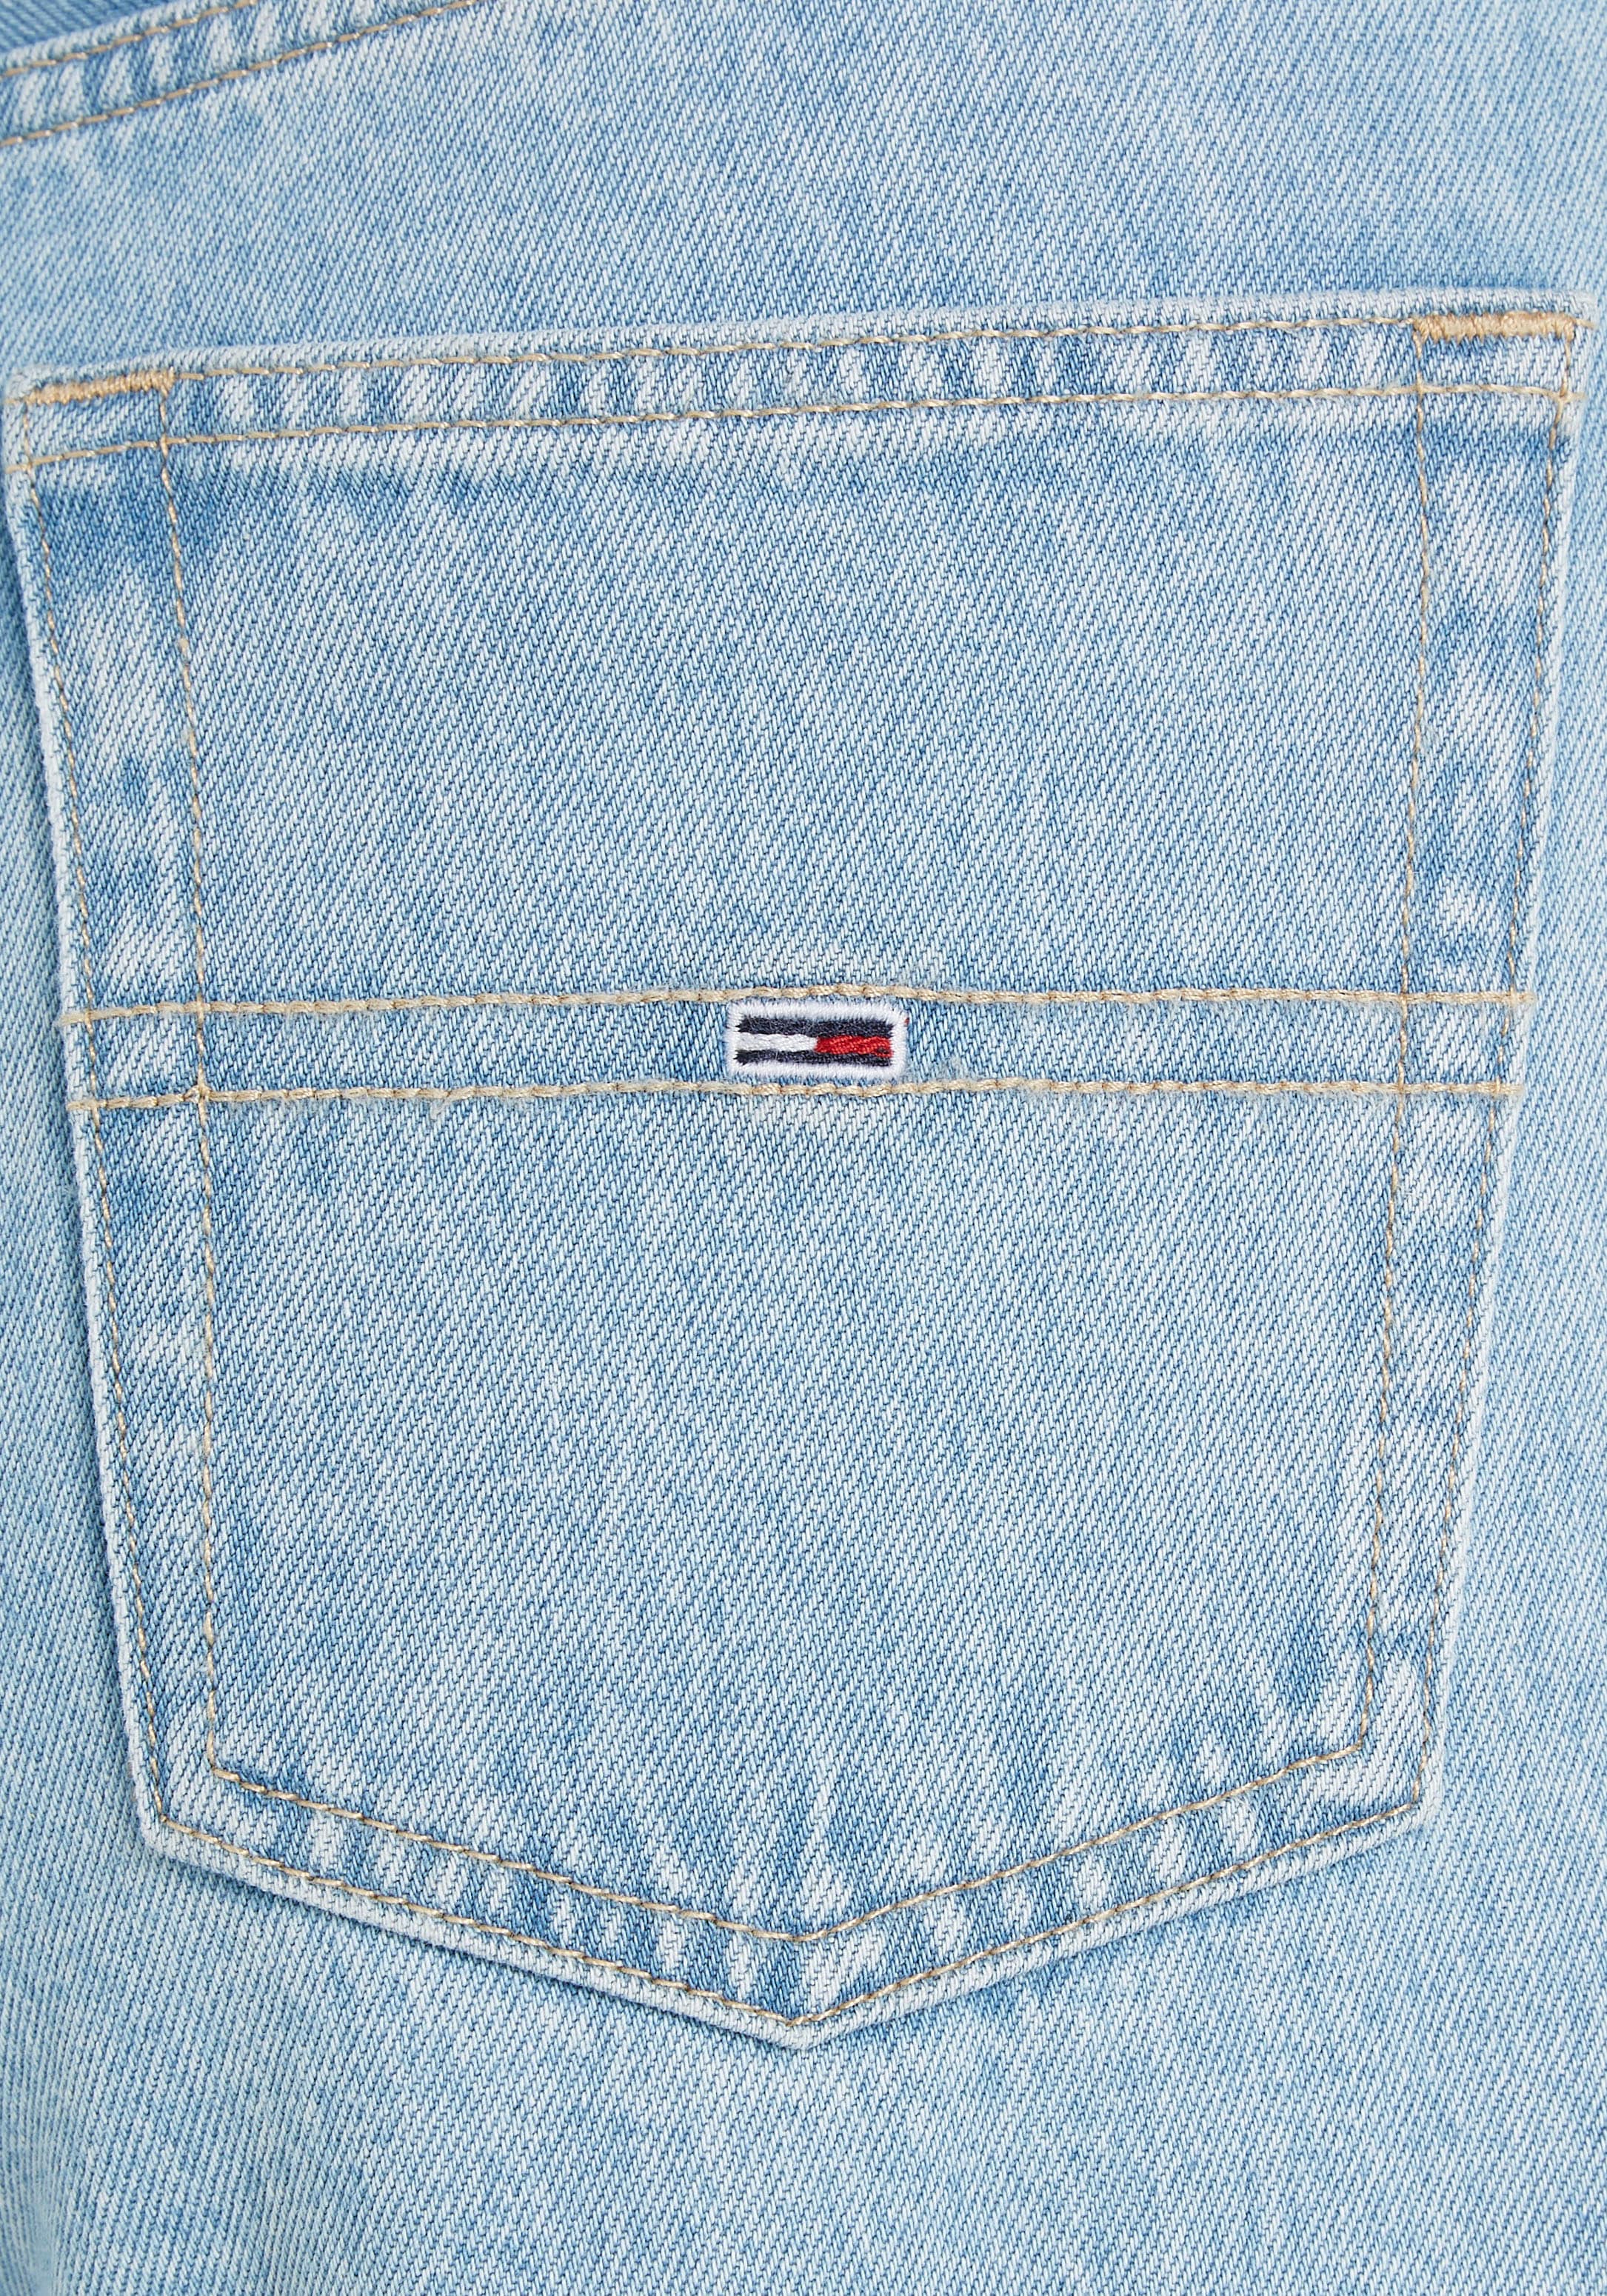 | mit online Jeans, Weite UNIVERSAL kaufen Logobadges Jeans Tommy Tommy Jeans